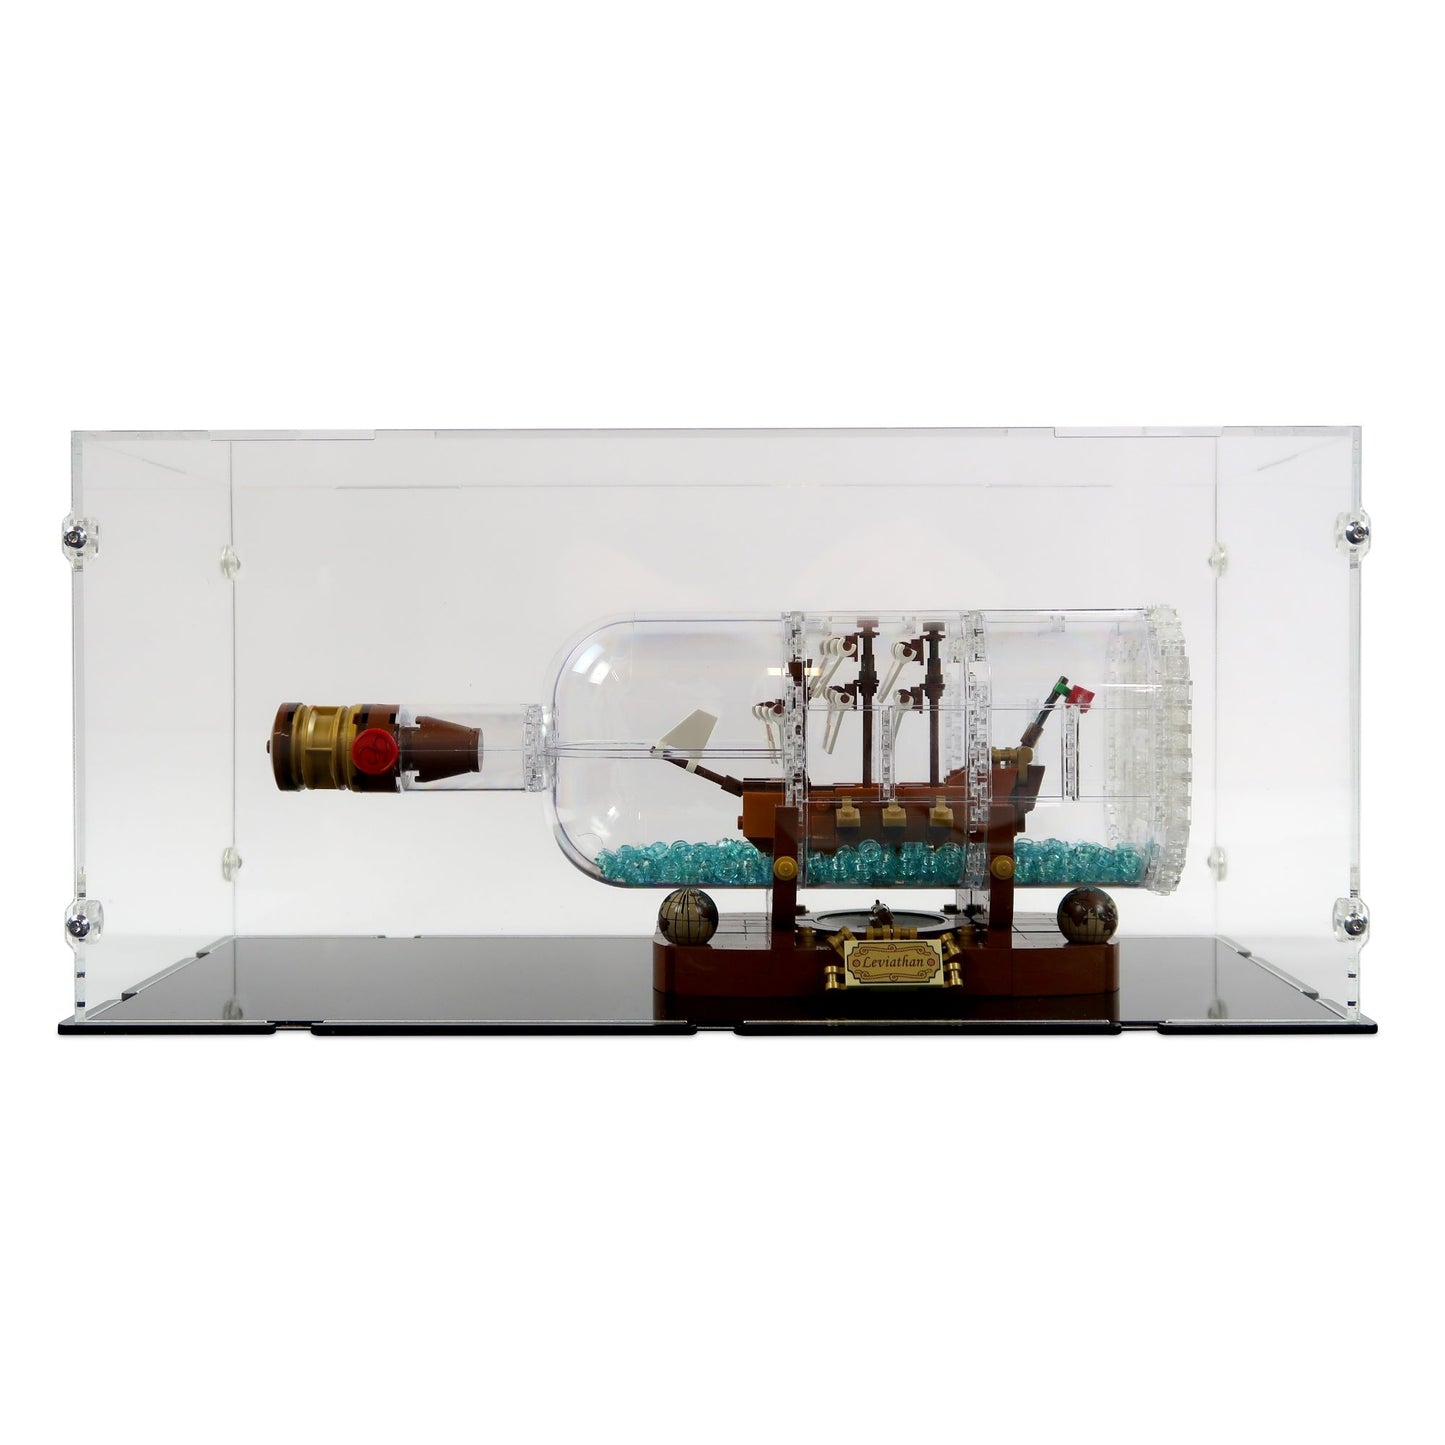 92177/21313 Ship in a Bottle Display Case